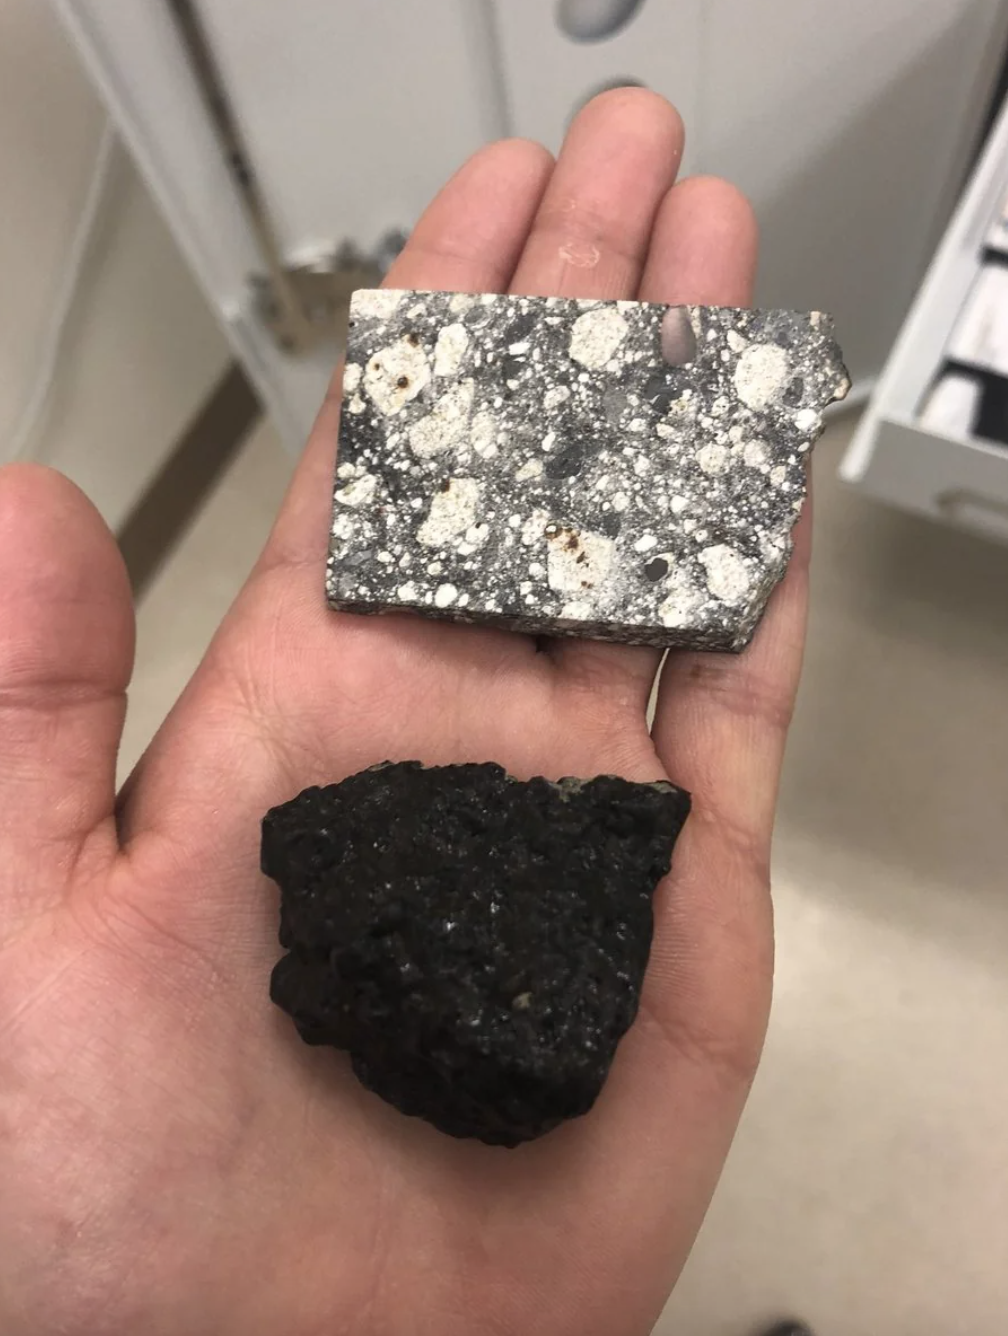 A person&#x27;s hand holding a speckled square mineral sample above a rough, irregular-shaped black sample